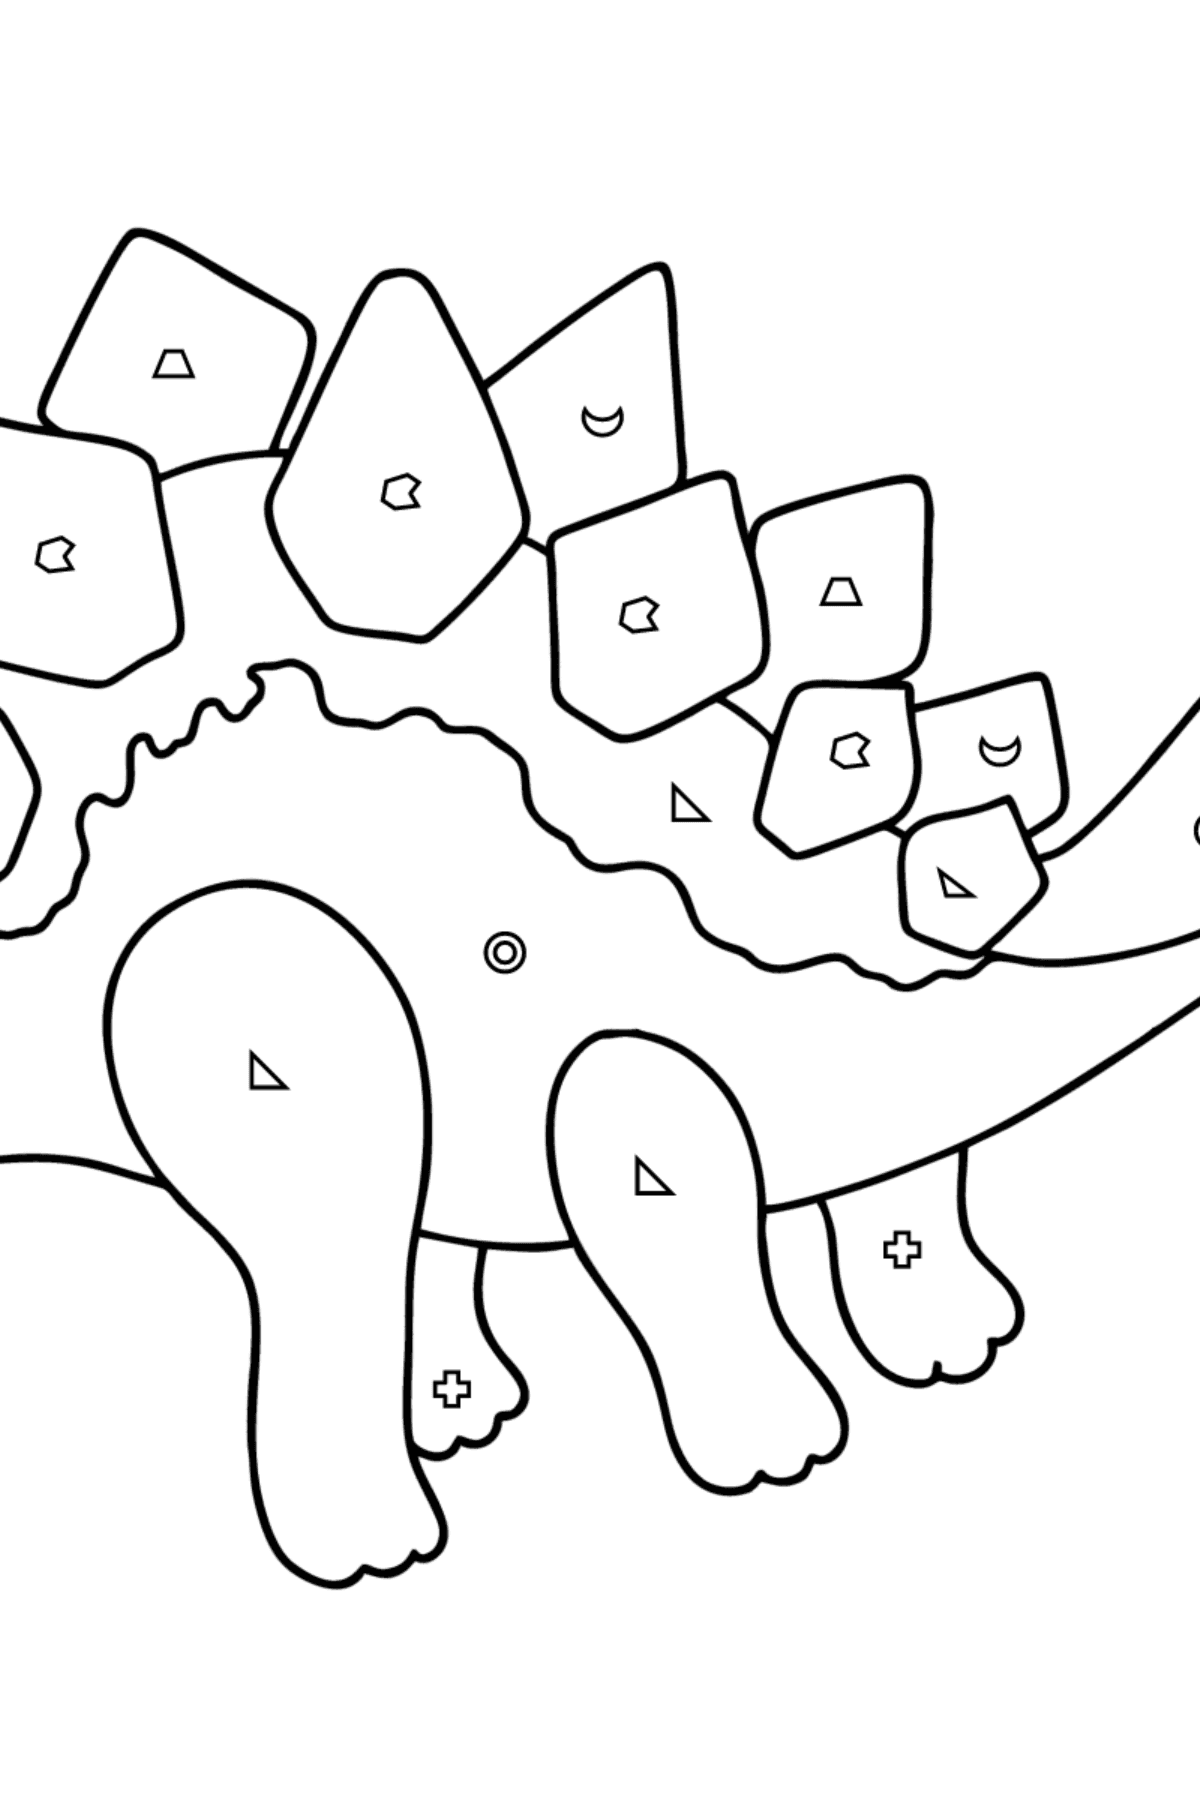 Stegosaurus coloring page - Coloring by Geometric Shapes for Kids